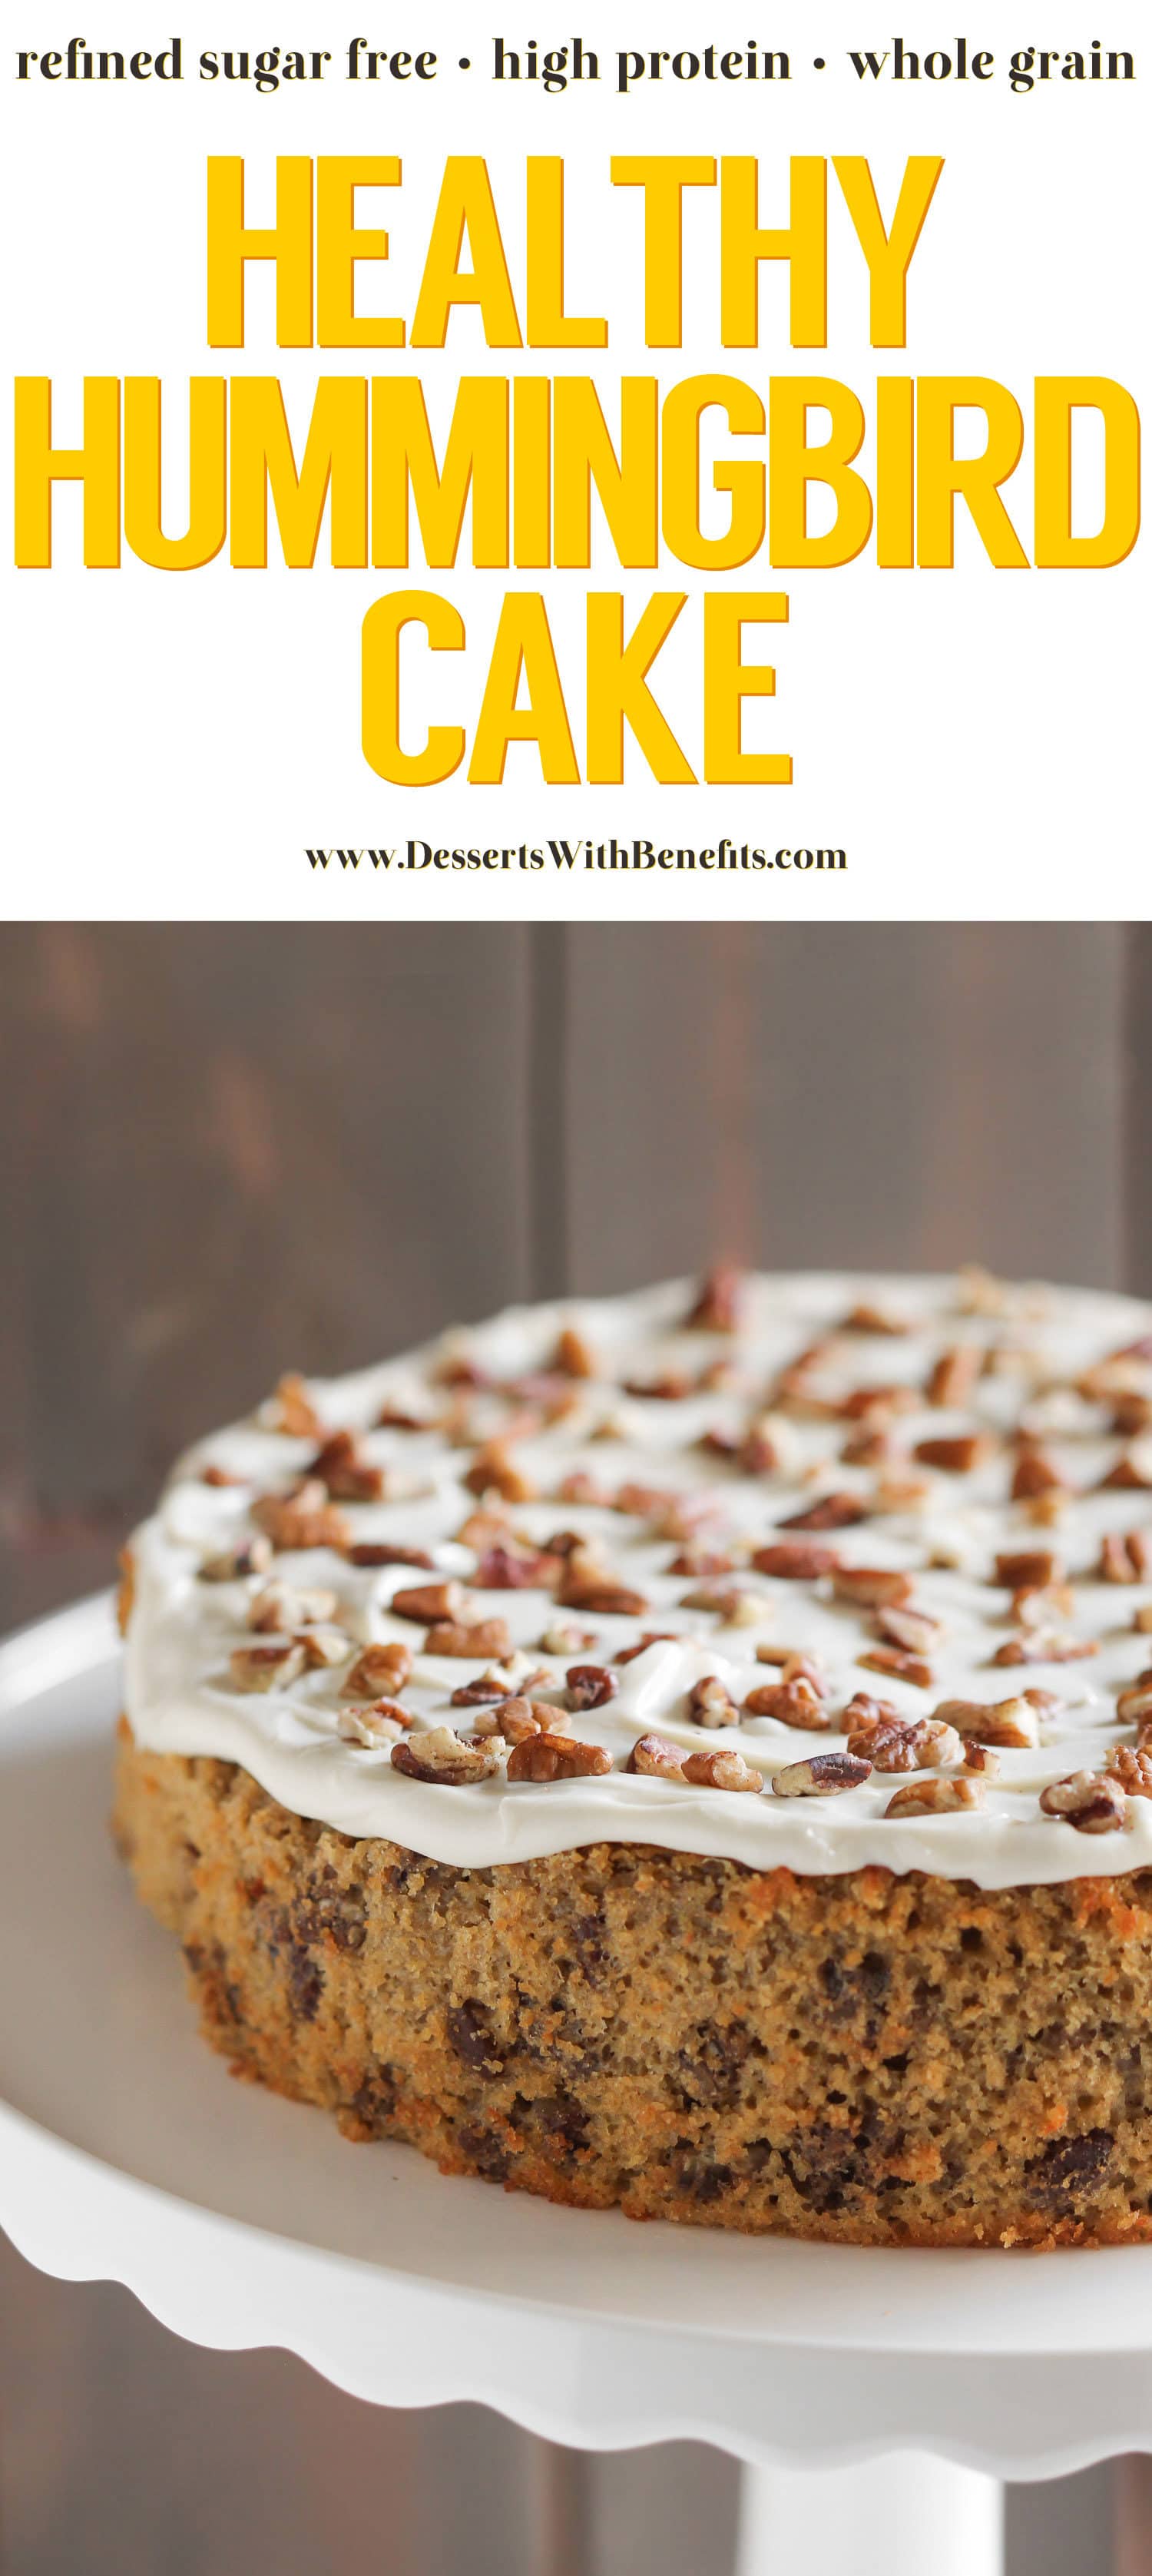 Hummingbird Cake is full of pineapple, banana, and pecans... and lots of calories and fat too. But NOT this one! This HEALTHY Hummingbird Cake so delicious, sweet, moist, and decadent, you'd never know it's lower calorie, lower fat, and lower sugar than the original. Healthy Dessert Recipes with sugar free, low calorie, low fat, low carb, high protein, gluten free, dairy free, and vegan options at the Desserts With Benefits Blog (www.DessertsWithBenefits.com)